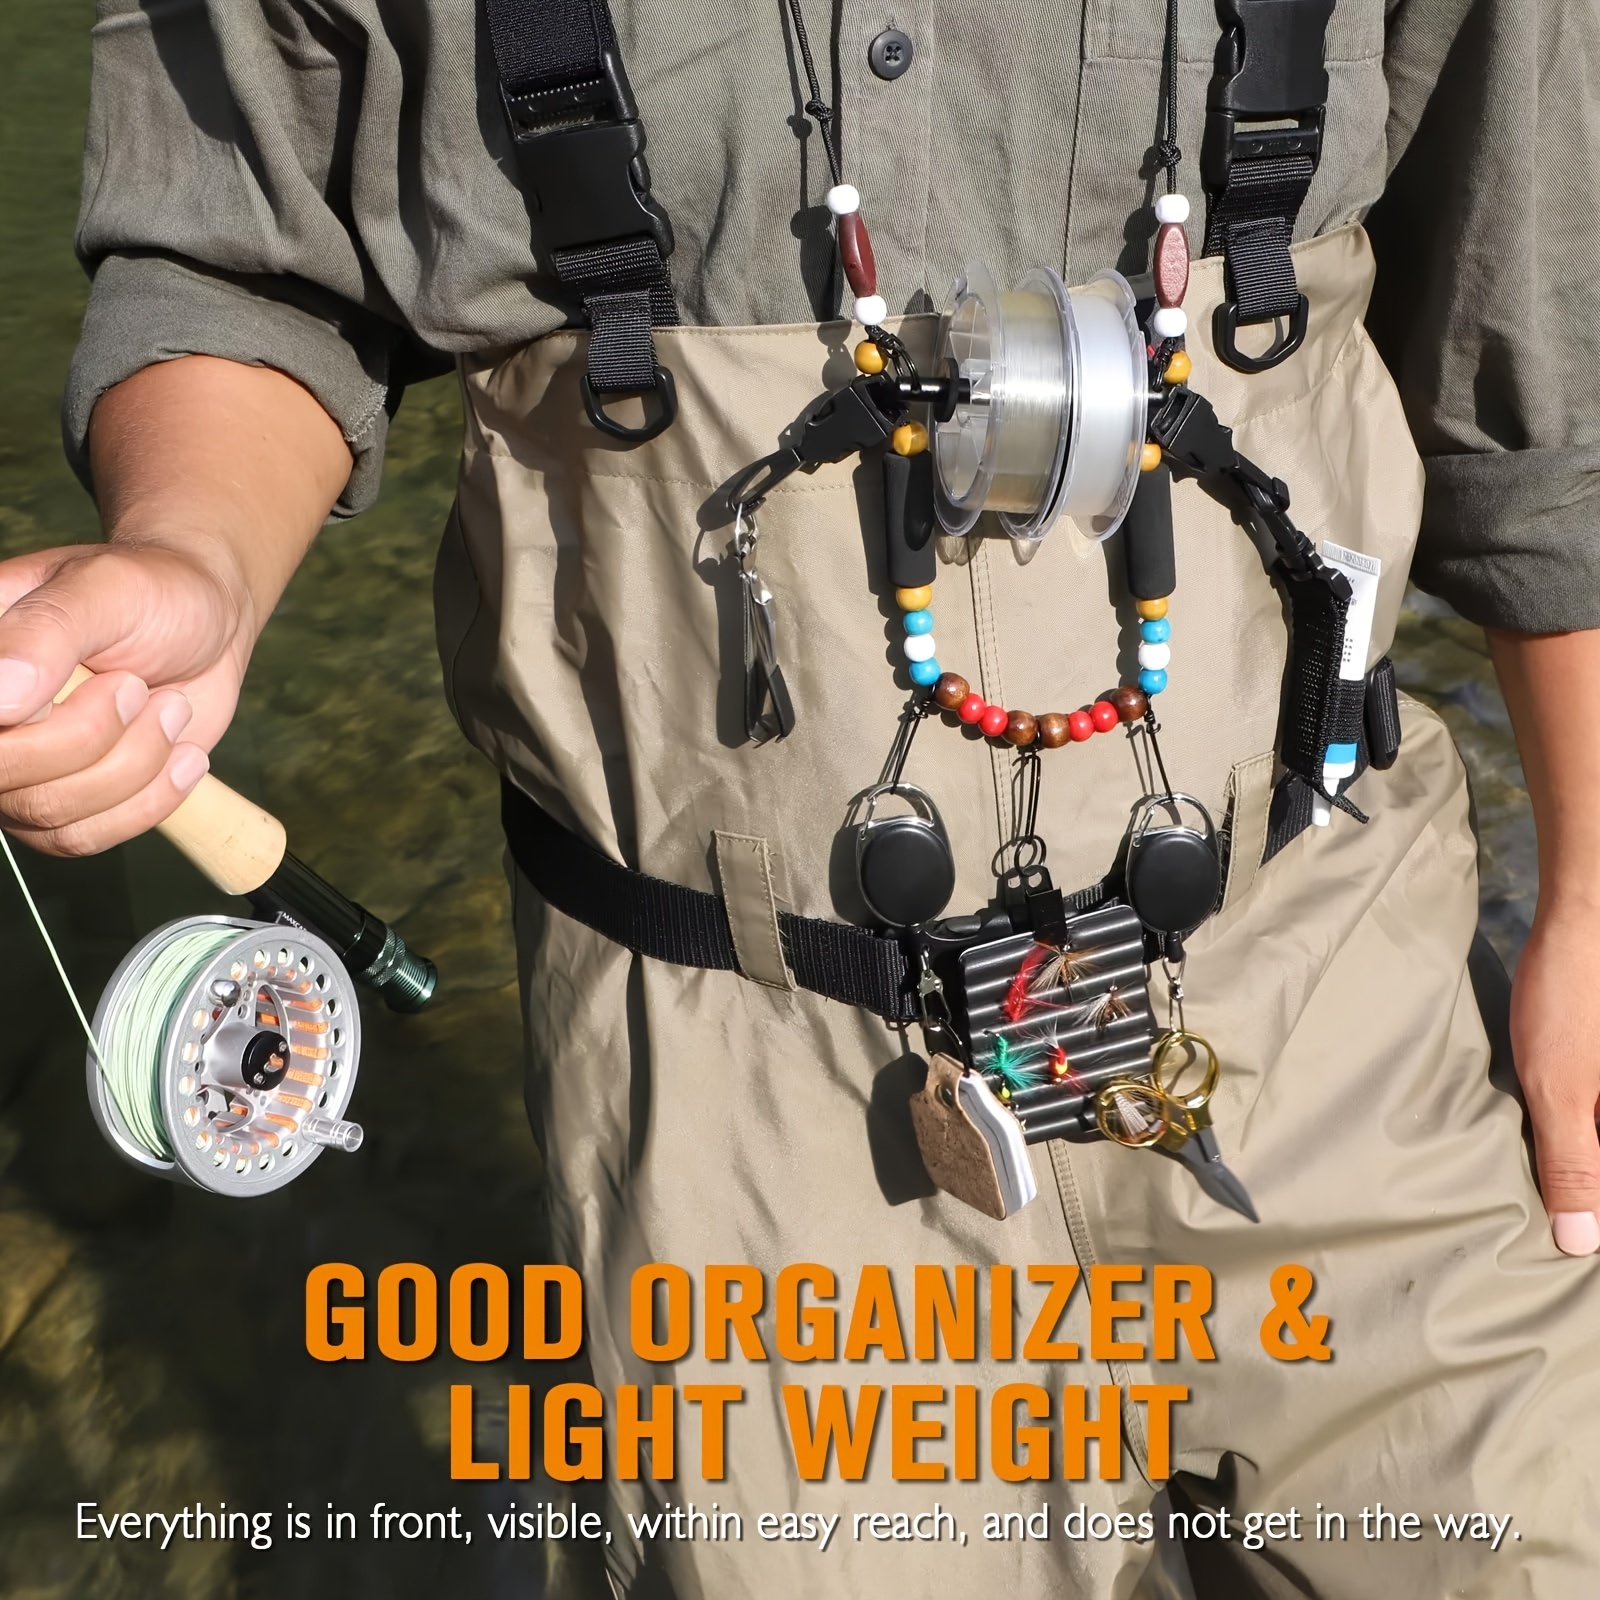 Fly Fishing Lanyard Fly Tippet Holder Light Weight - Temu